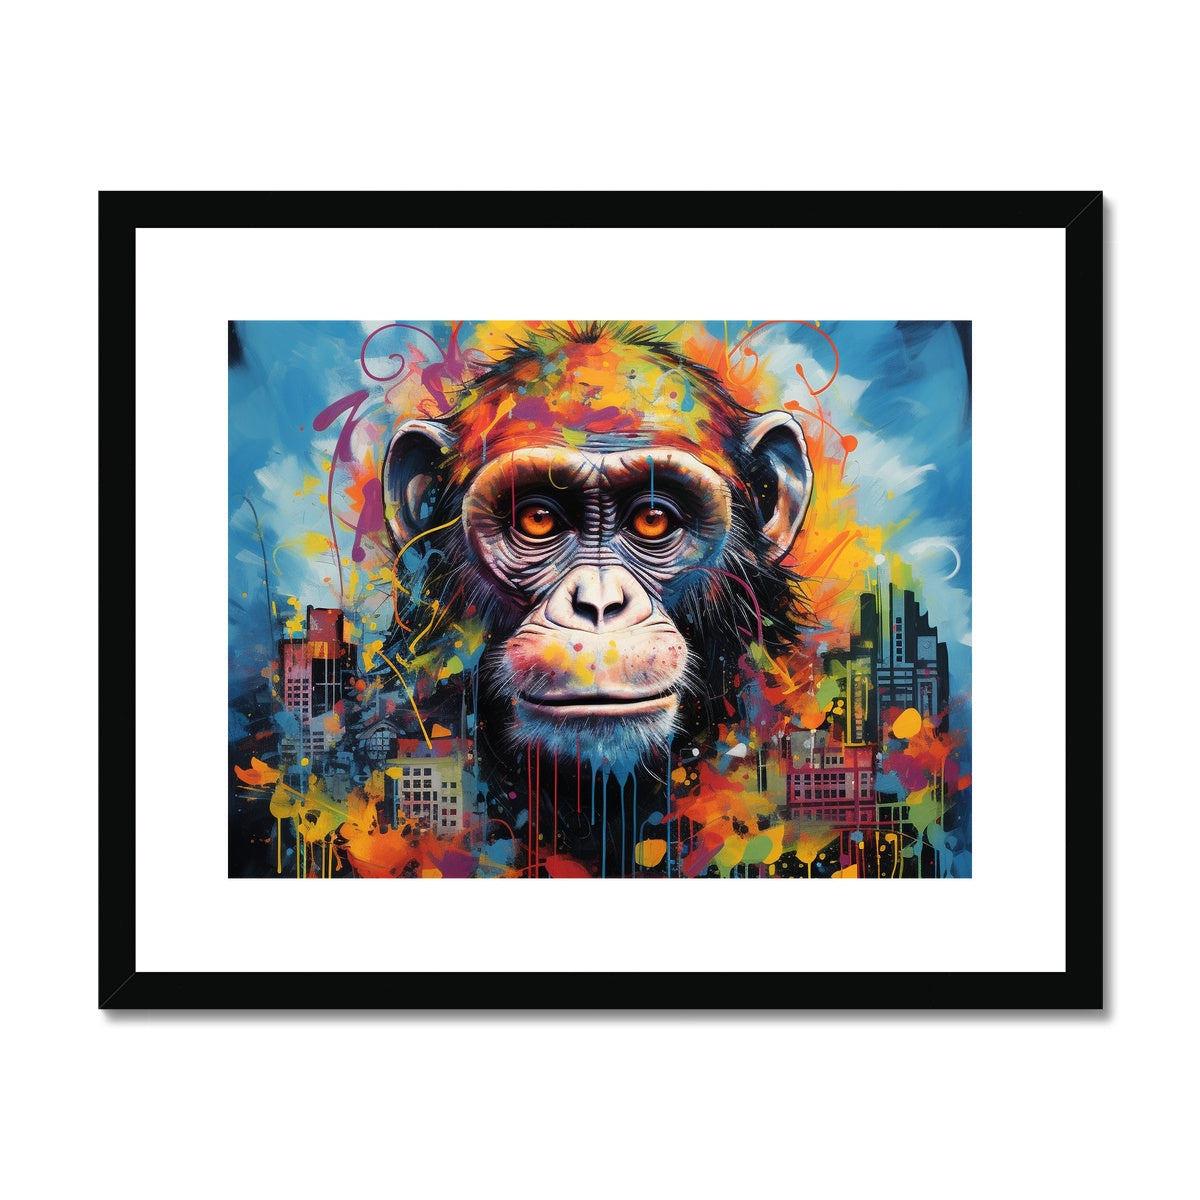 Finger Paint: Limited Edition Framed & Mounted Print